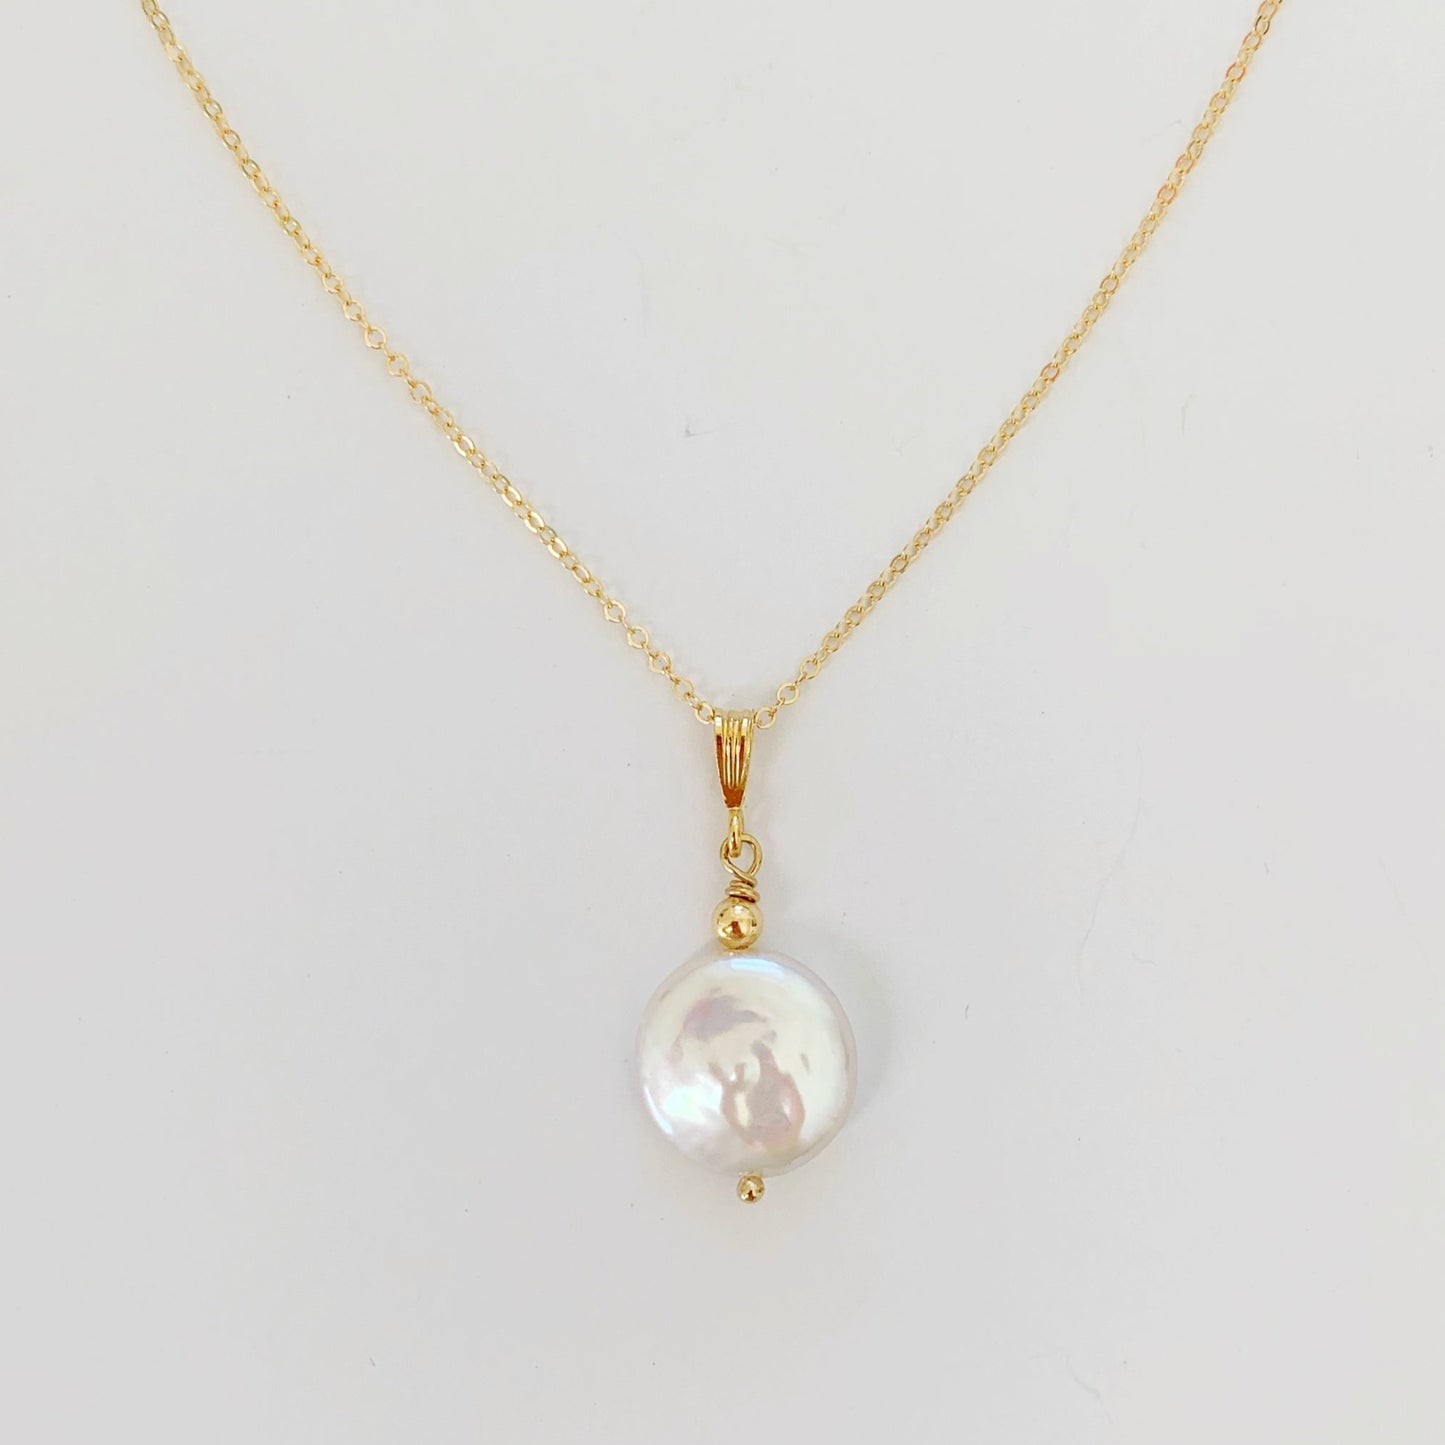 A close up view of the newport gala necklace from mermaids and madeleines. this necklace is a large freshwater coin pearl pendant with 14k gold filled findings and chain and its photographed on a white surface